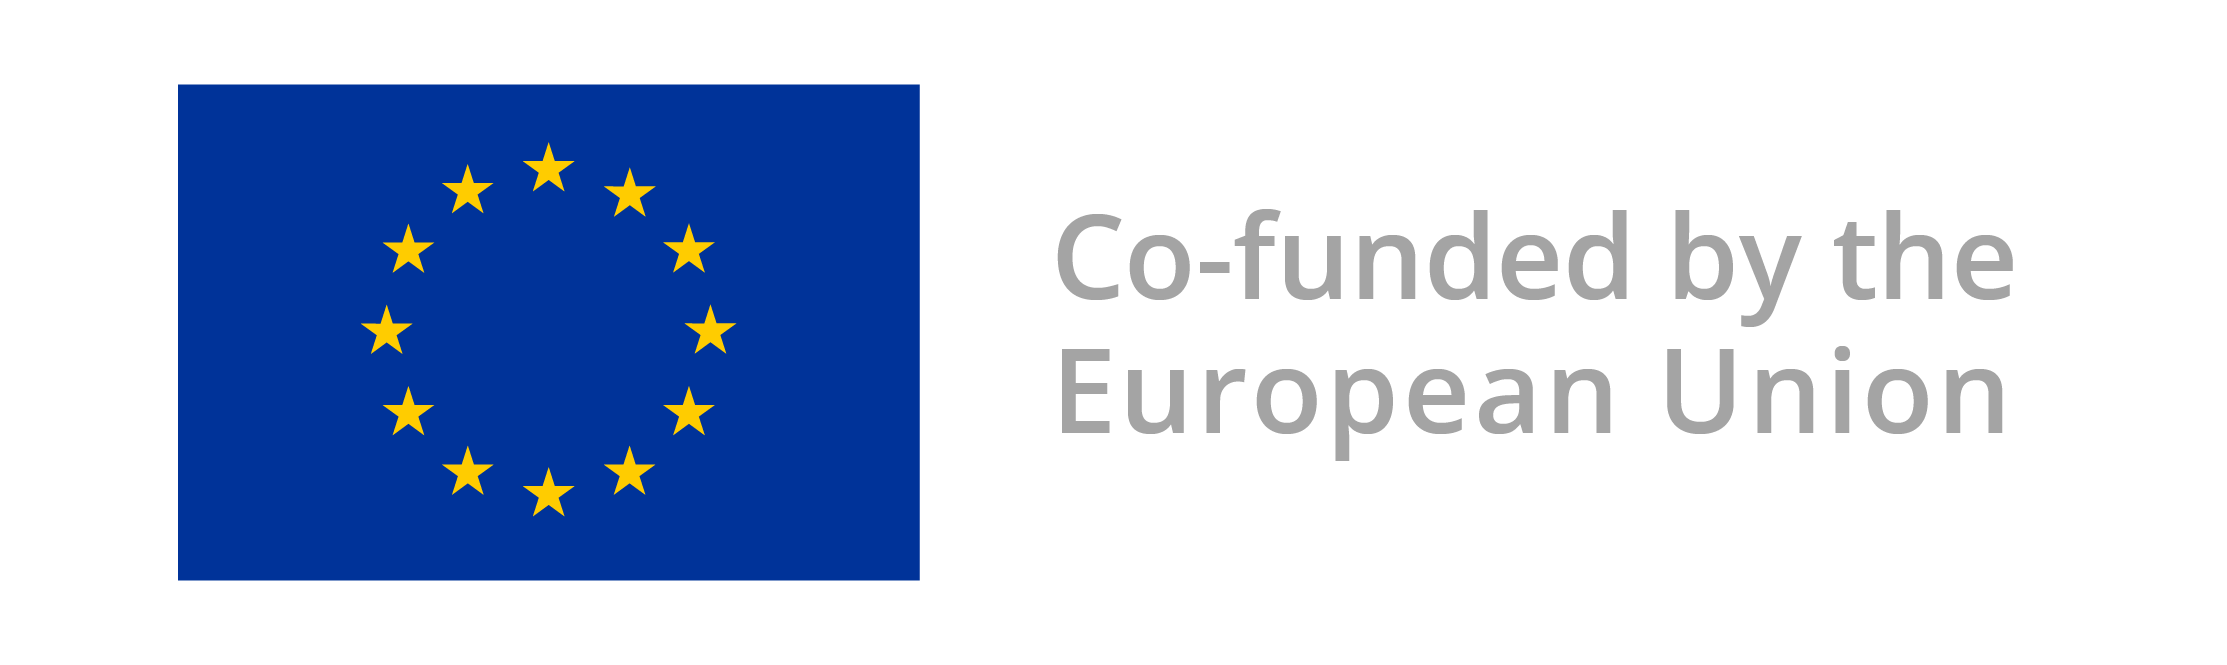 European Union Flag with text on the right that says co-funded by the European Union